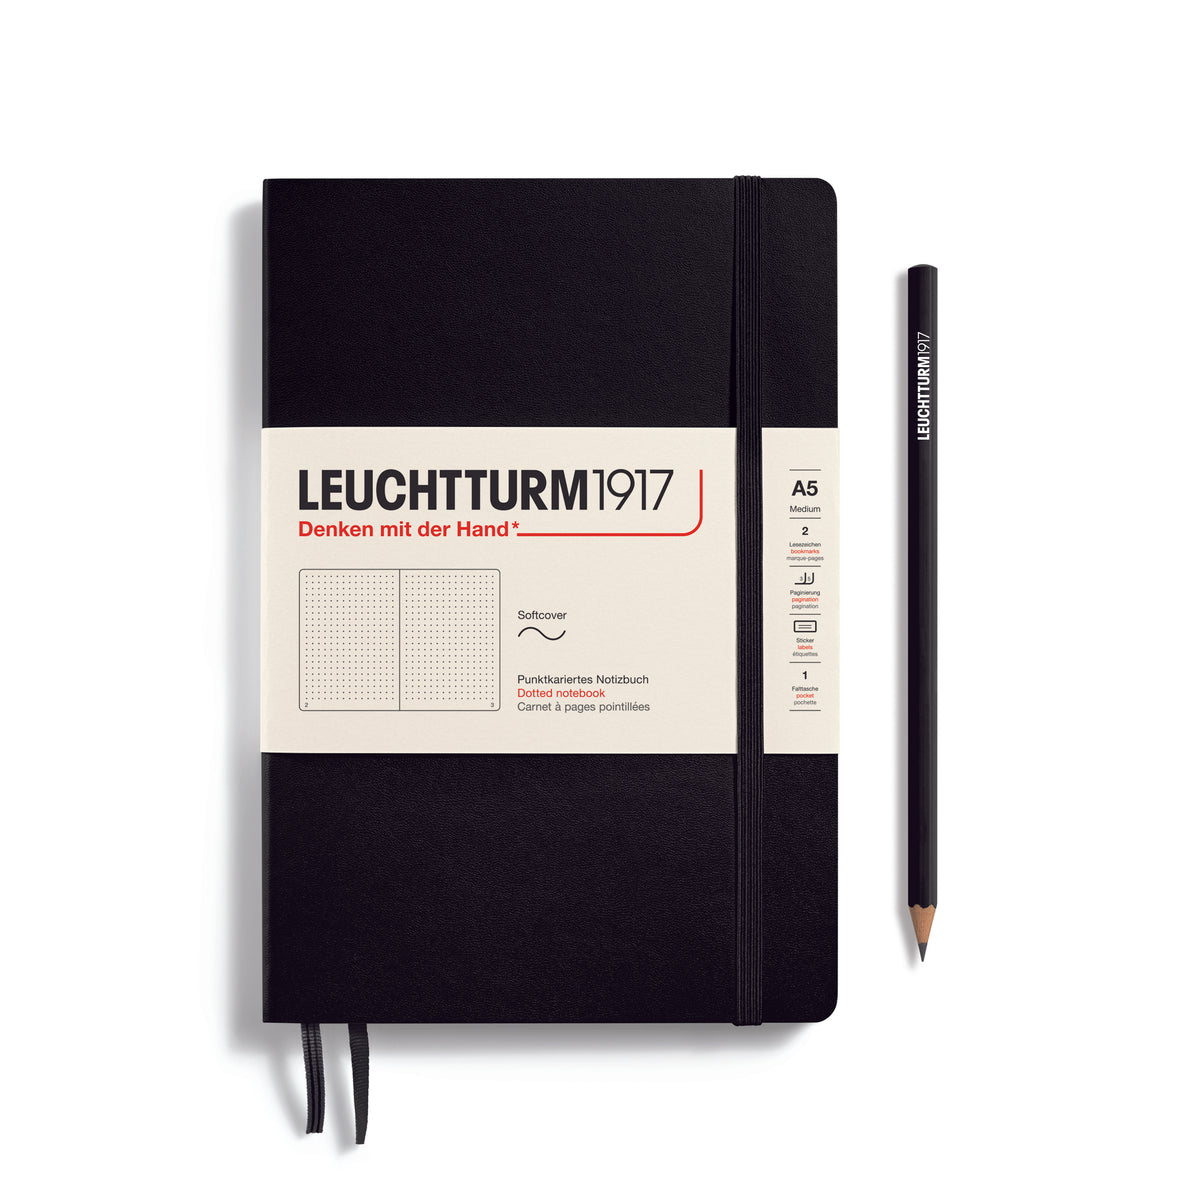 LEUCHTTURM1917 Notebook A5 Medium Softcover in black with dotted ruling - penny black